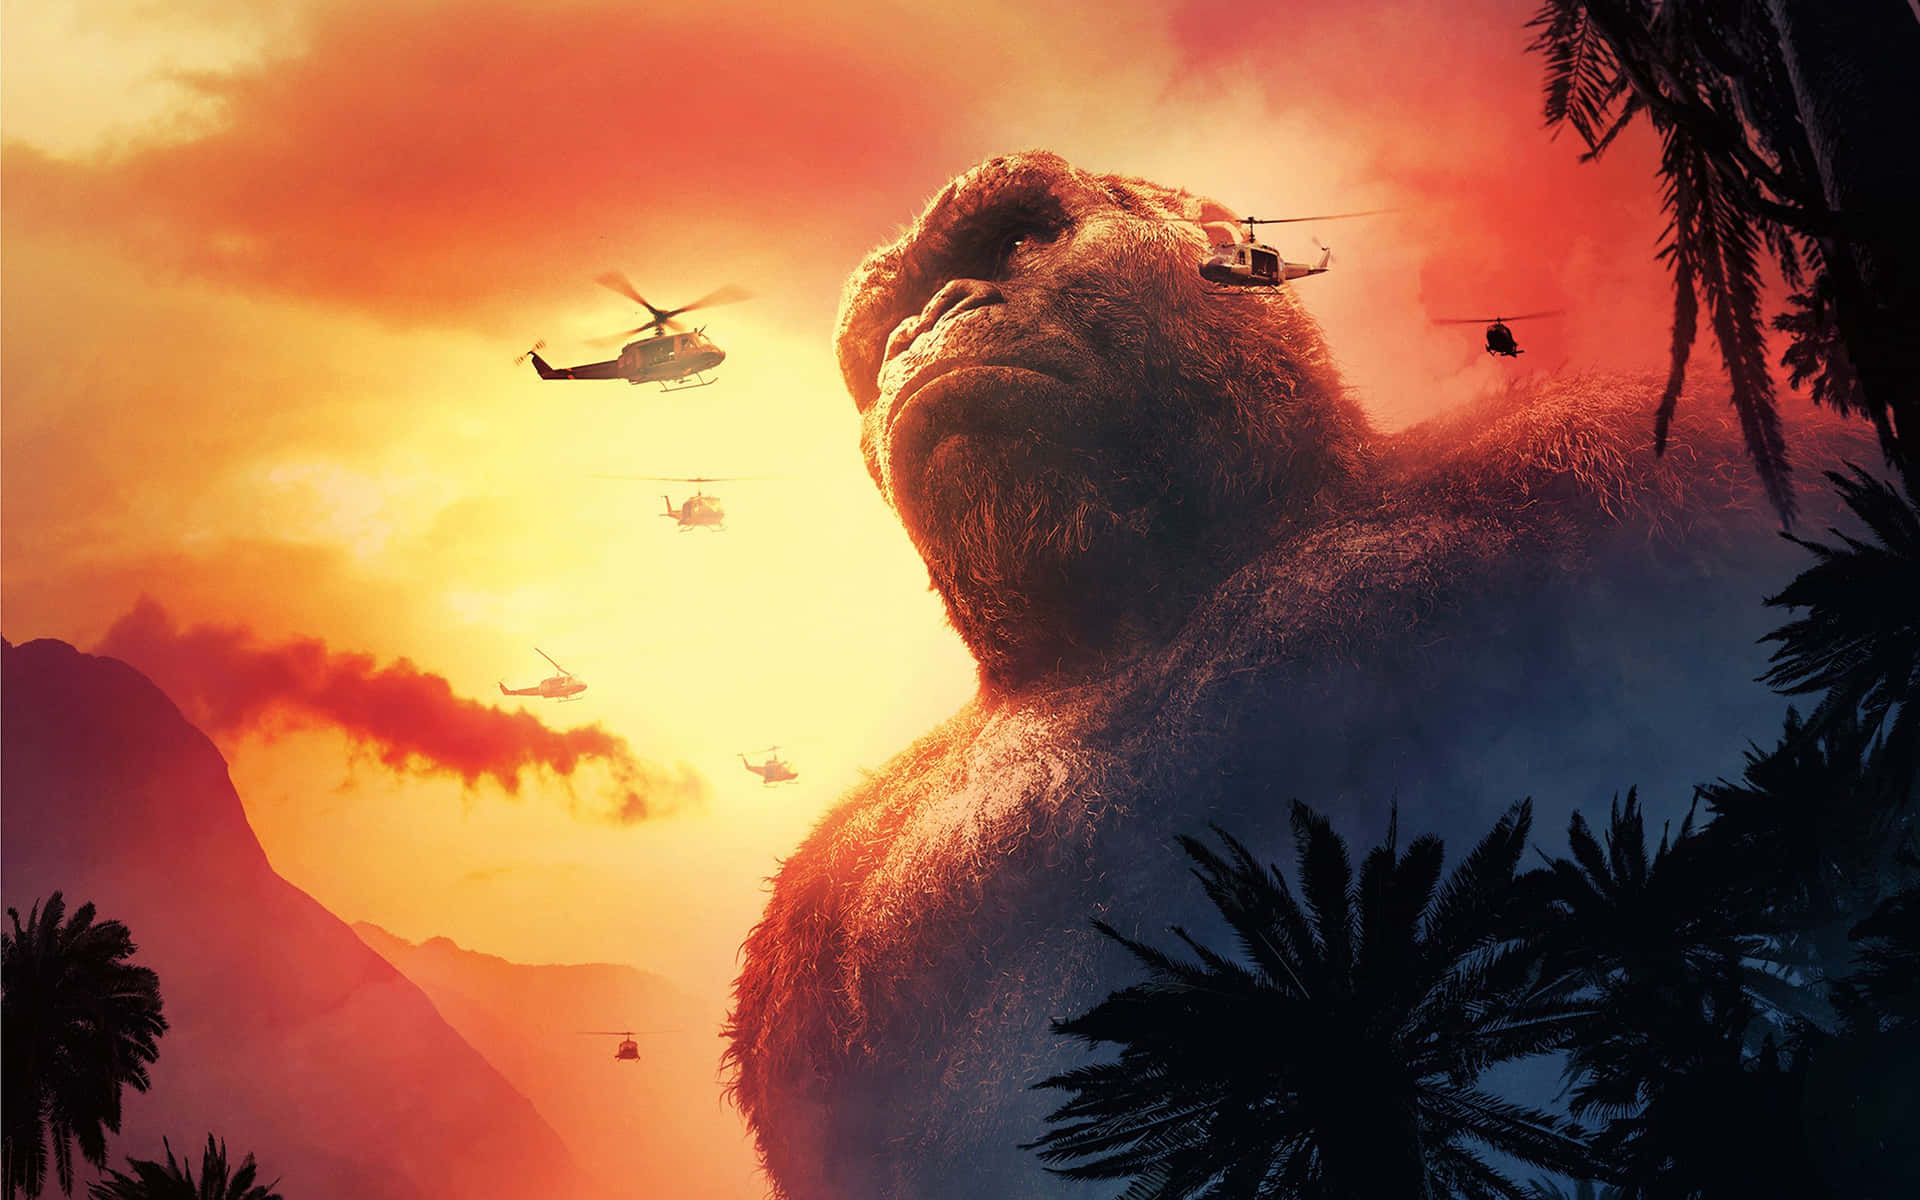 "Witness the Epic Might of King Kong in 4K!" Wallpaper